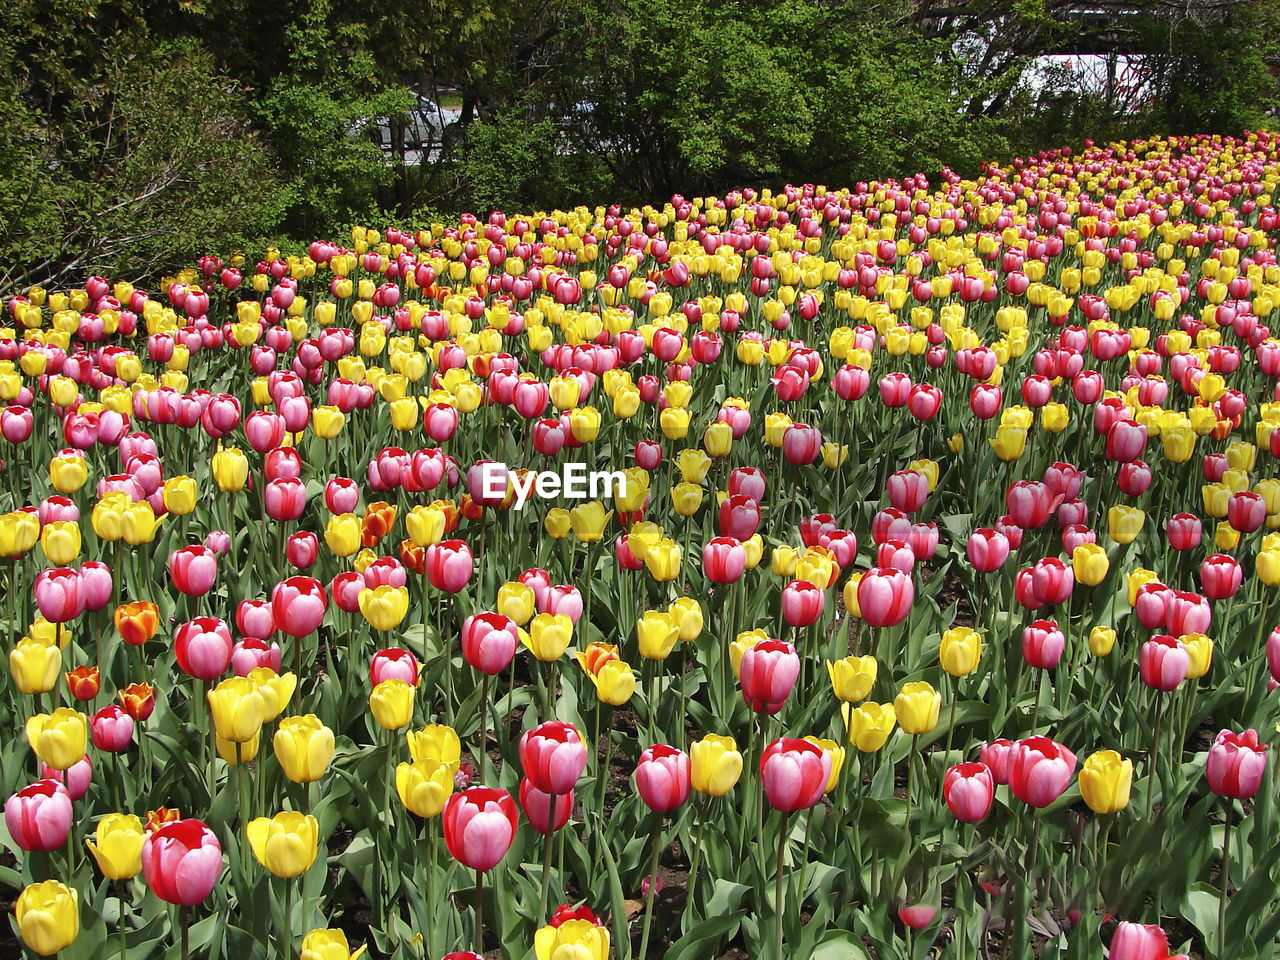 View of tulips in park